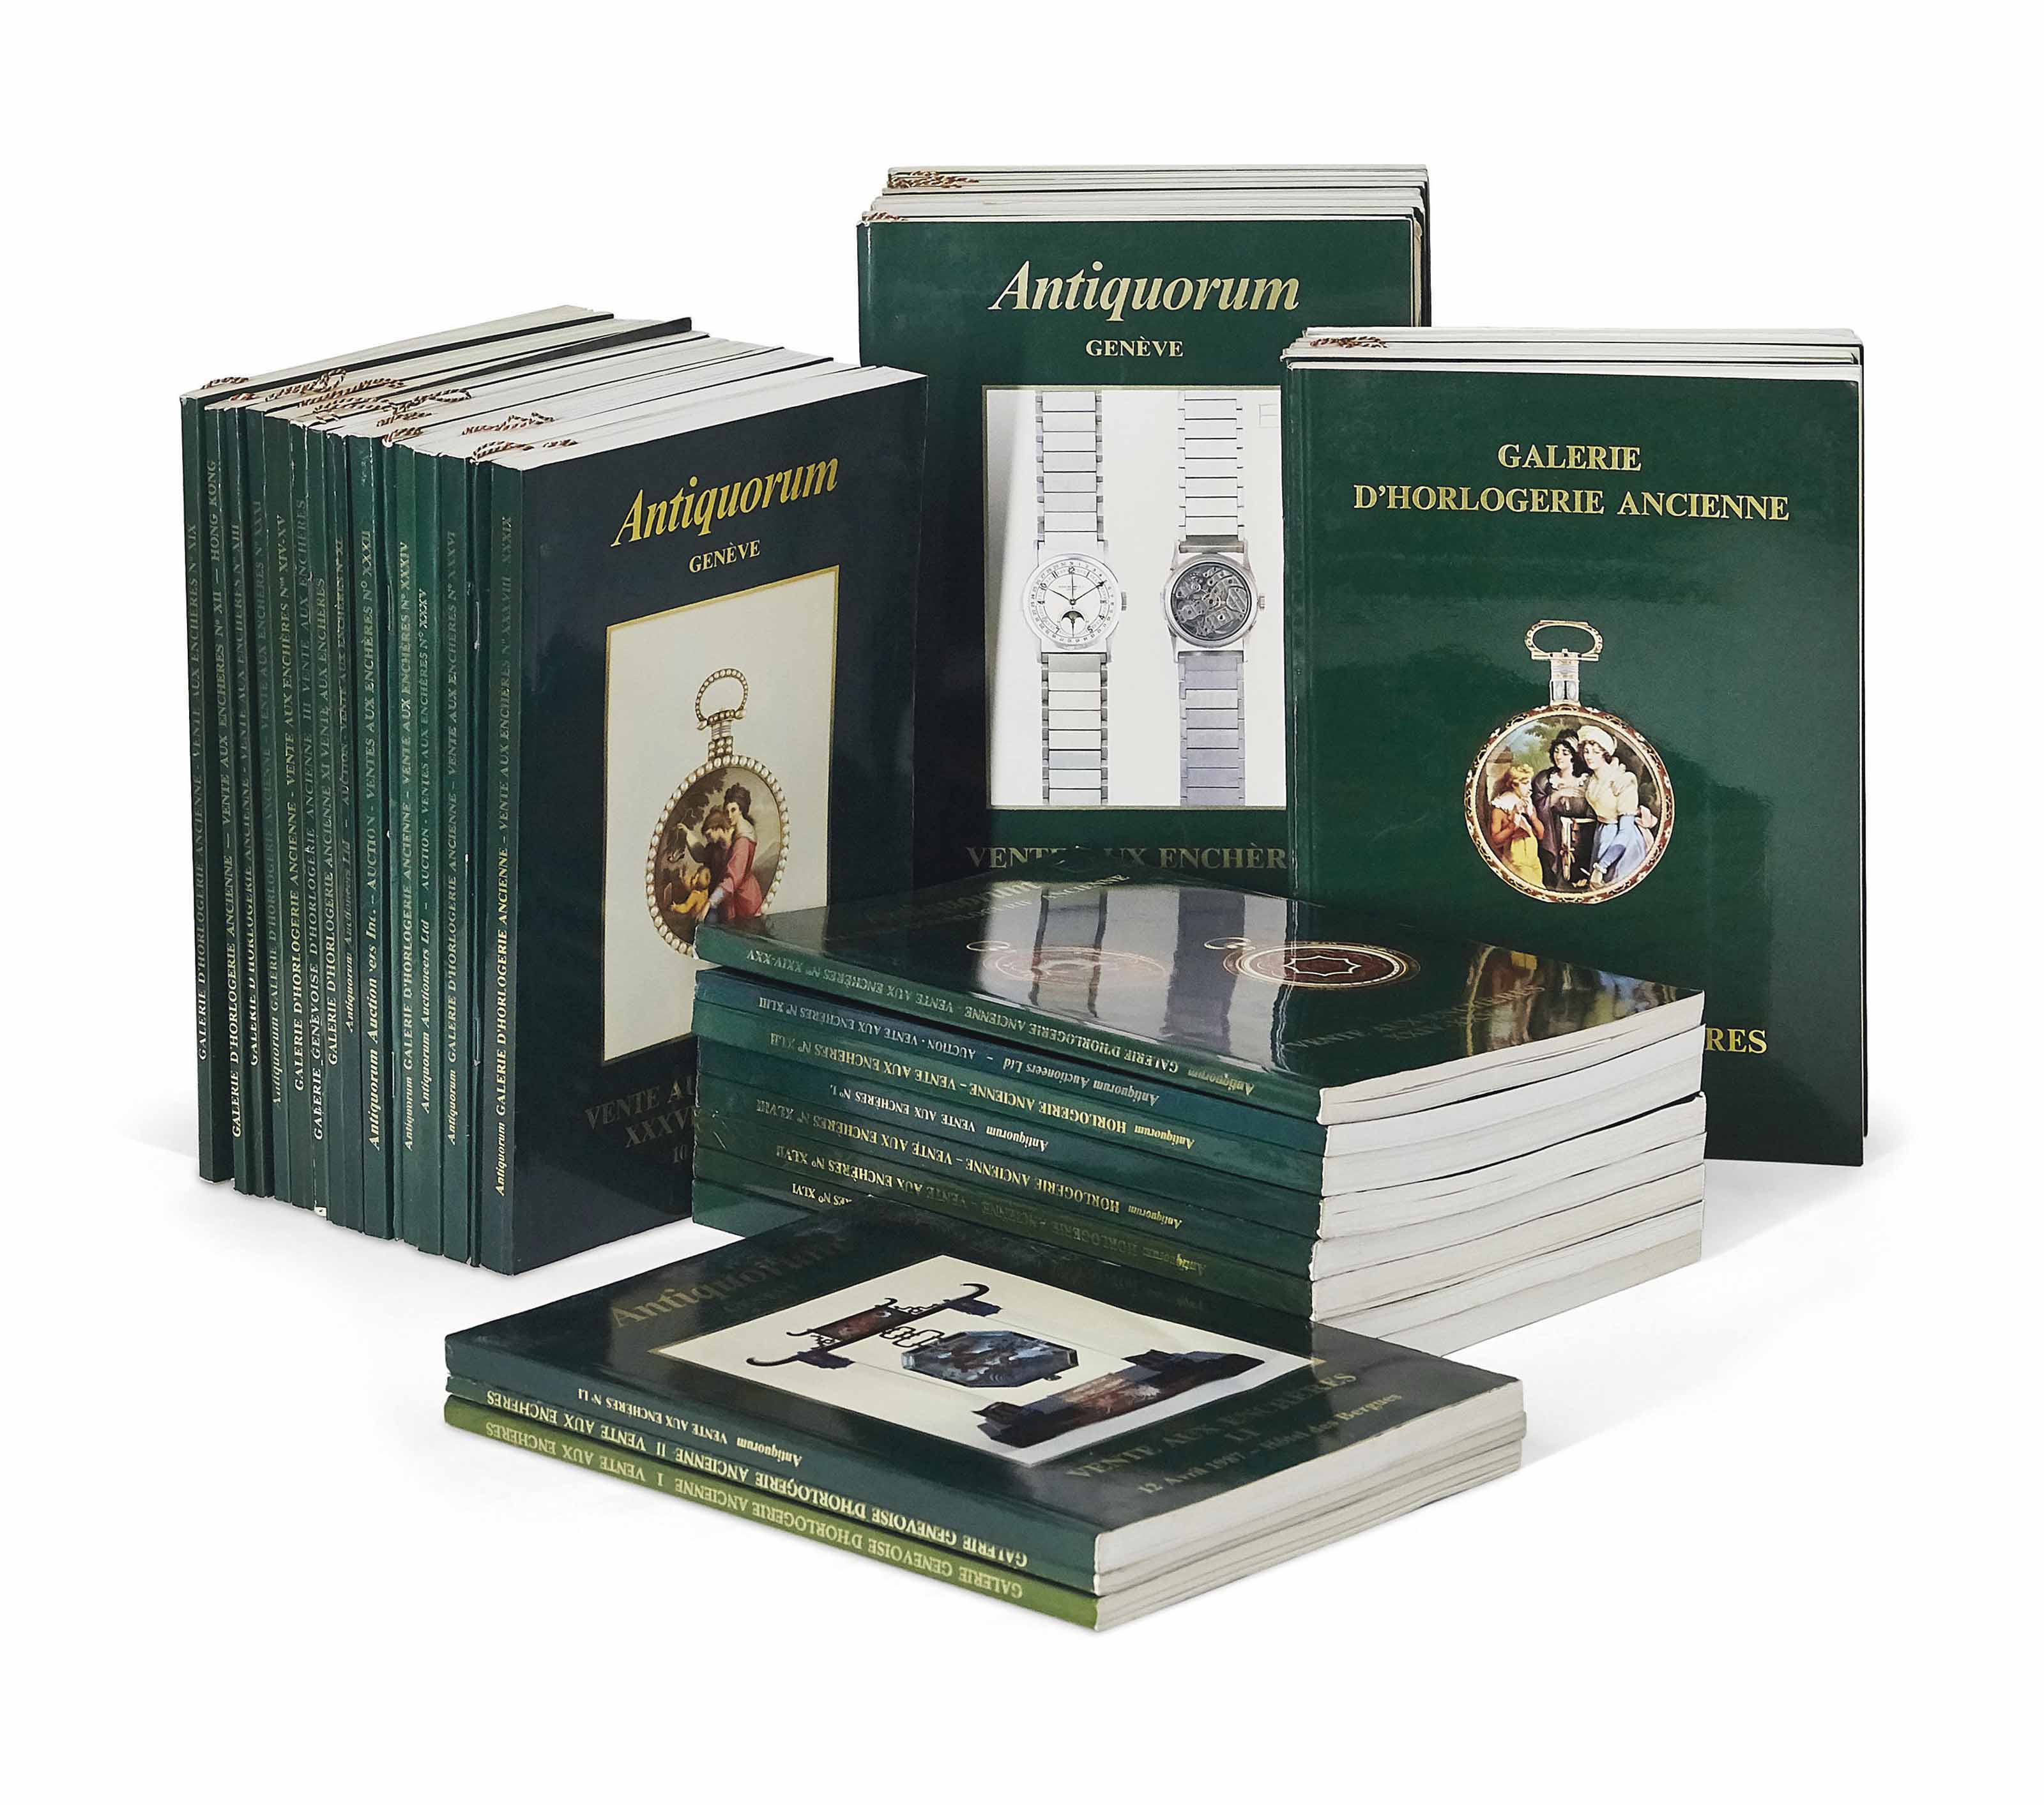 Early Antiquorum and Galerie d'Horlogerie Ancienne catalogues in The Early Days of Vintage Wristwatch Collecting for A Collected Man London